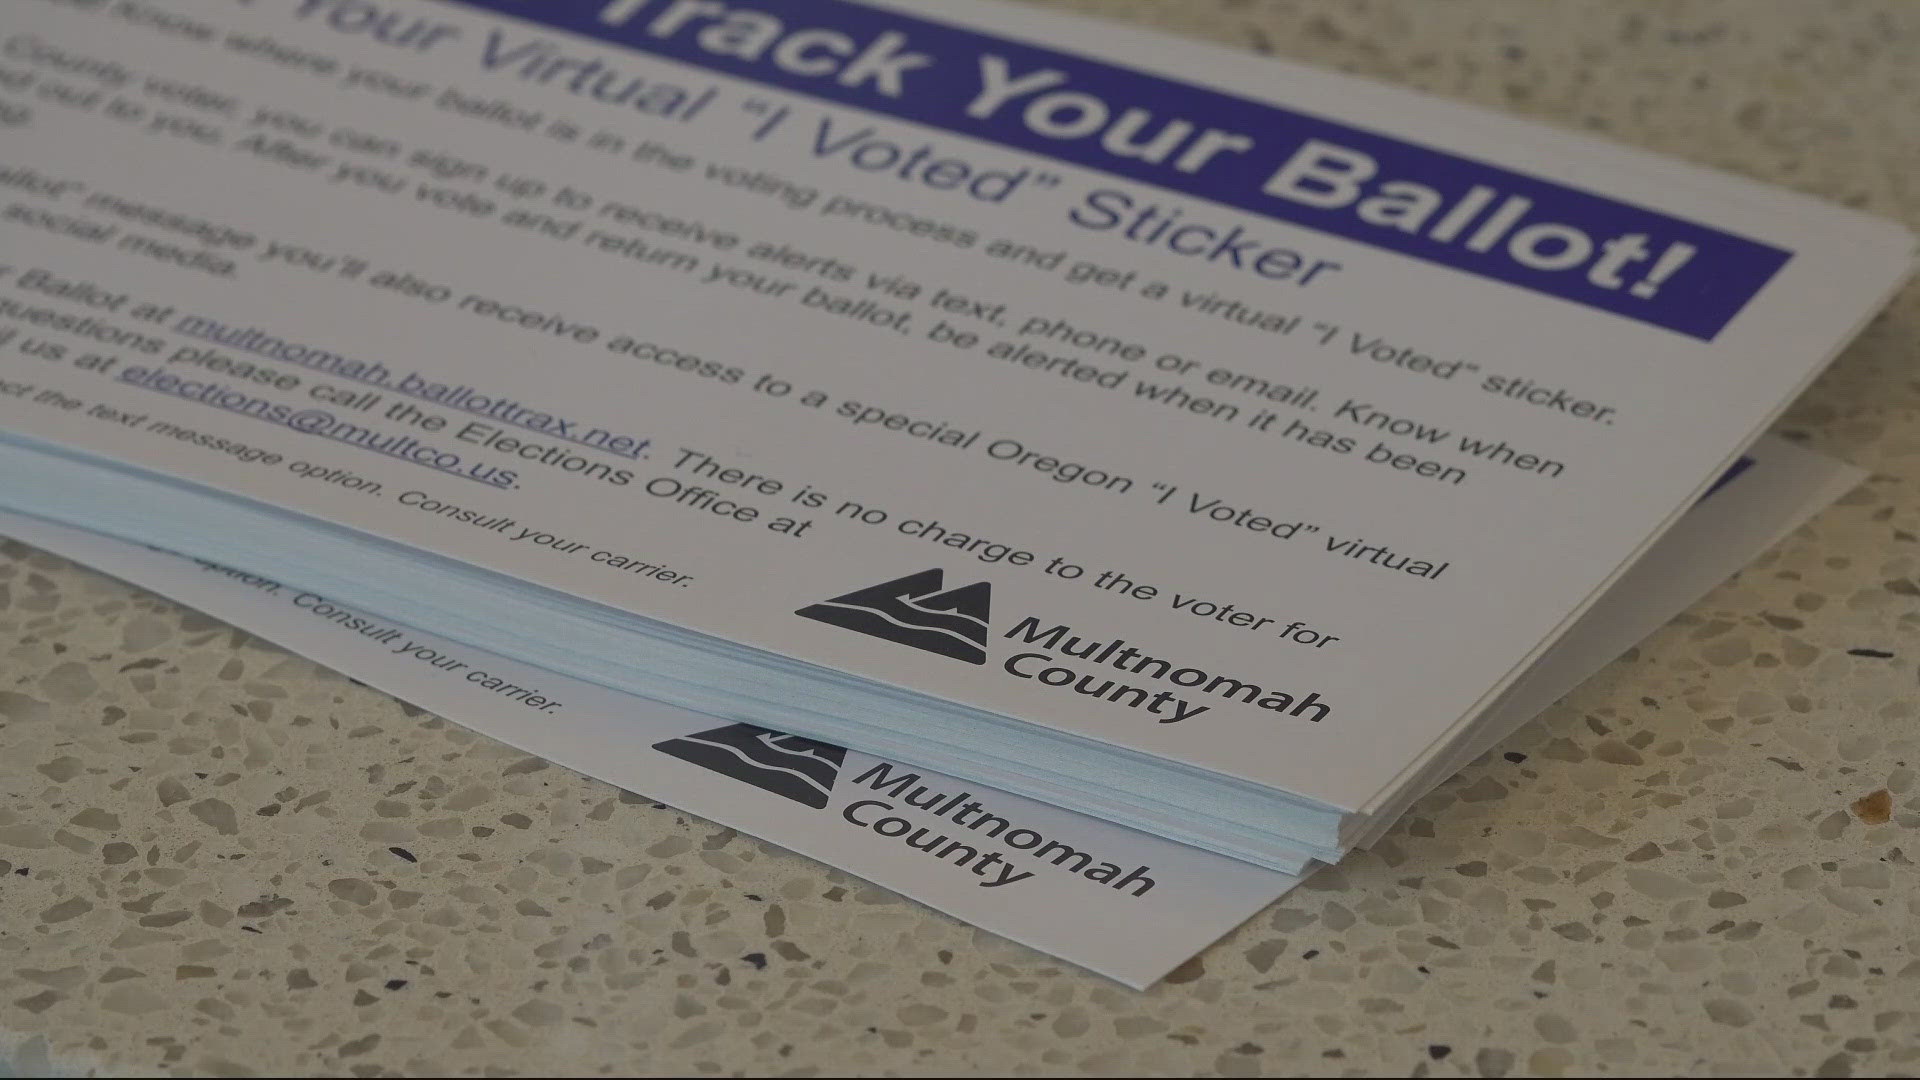 Multnomah County Elections is replacing primary election ballots for up to 9,300 voters after the original versions accidentally omitted a measure.